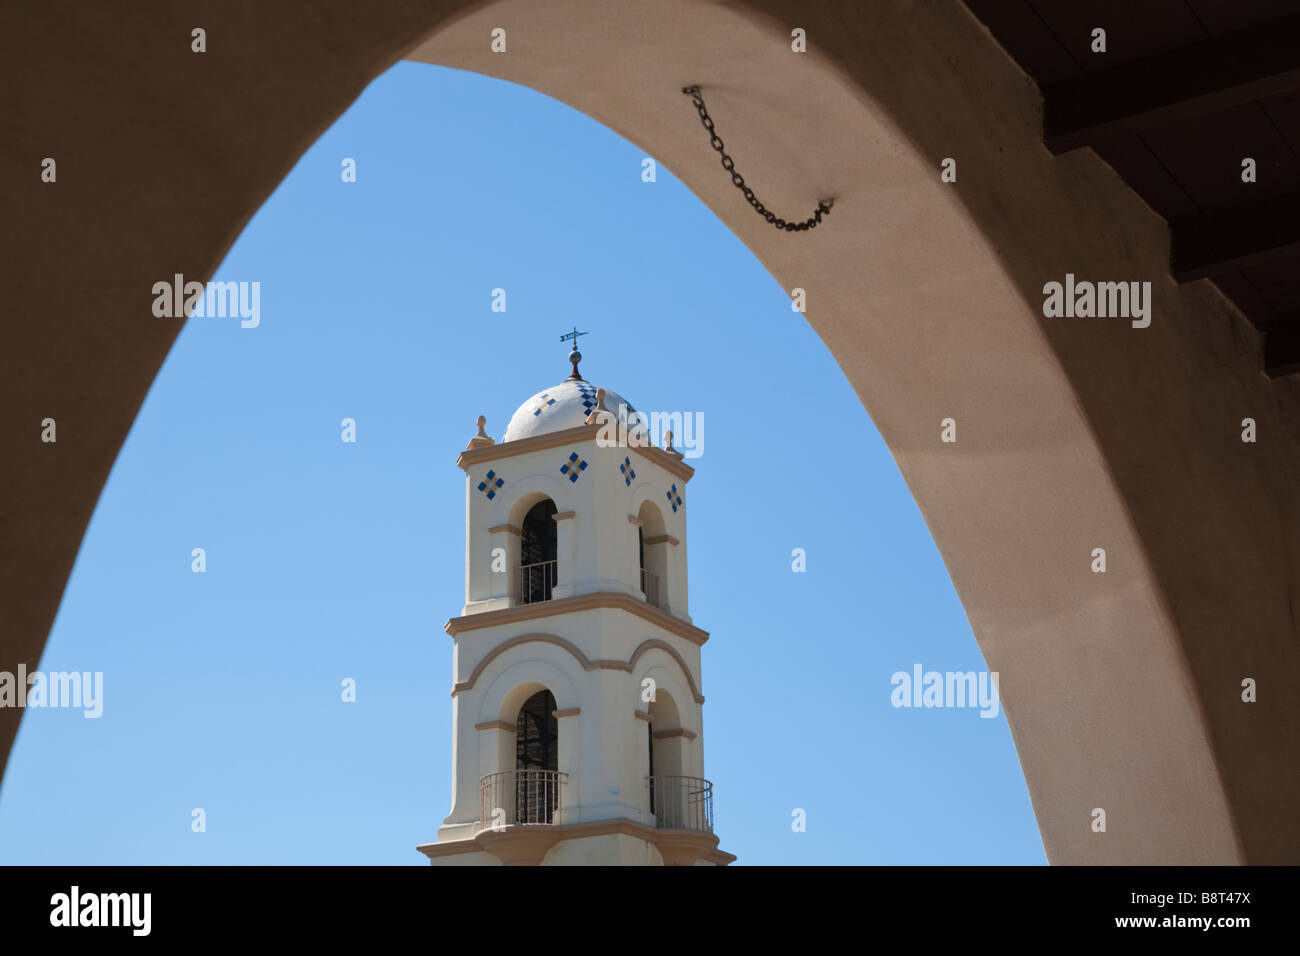 Detail of bell tower of the post office in Ojai California, colonial revival architecture, framed by an archway of the arcade. Stock Photo